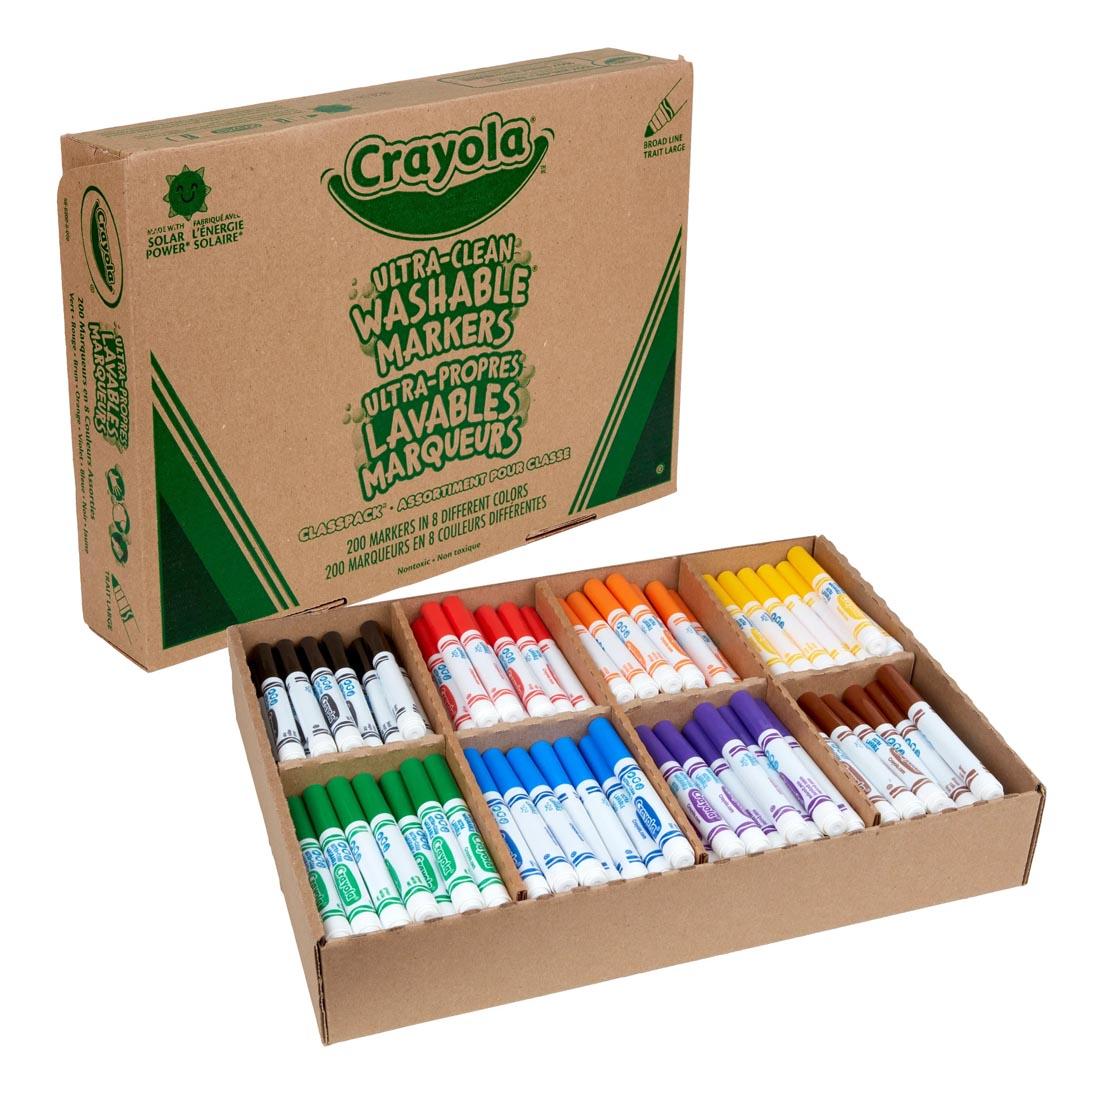 Crayola Ultra-Clean Washable Broad Line Markers 200-Count Classpack box shown both open and closed